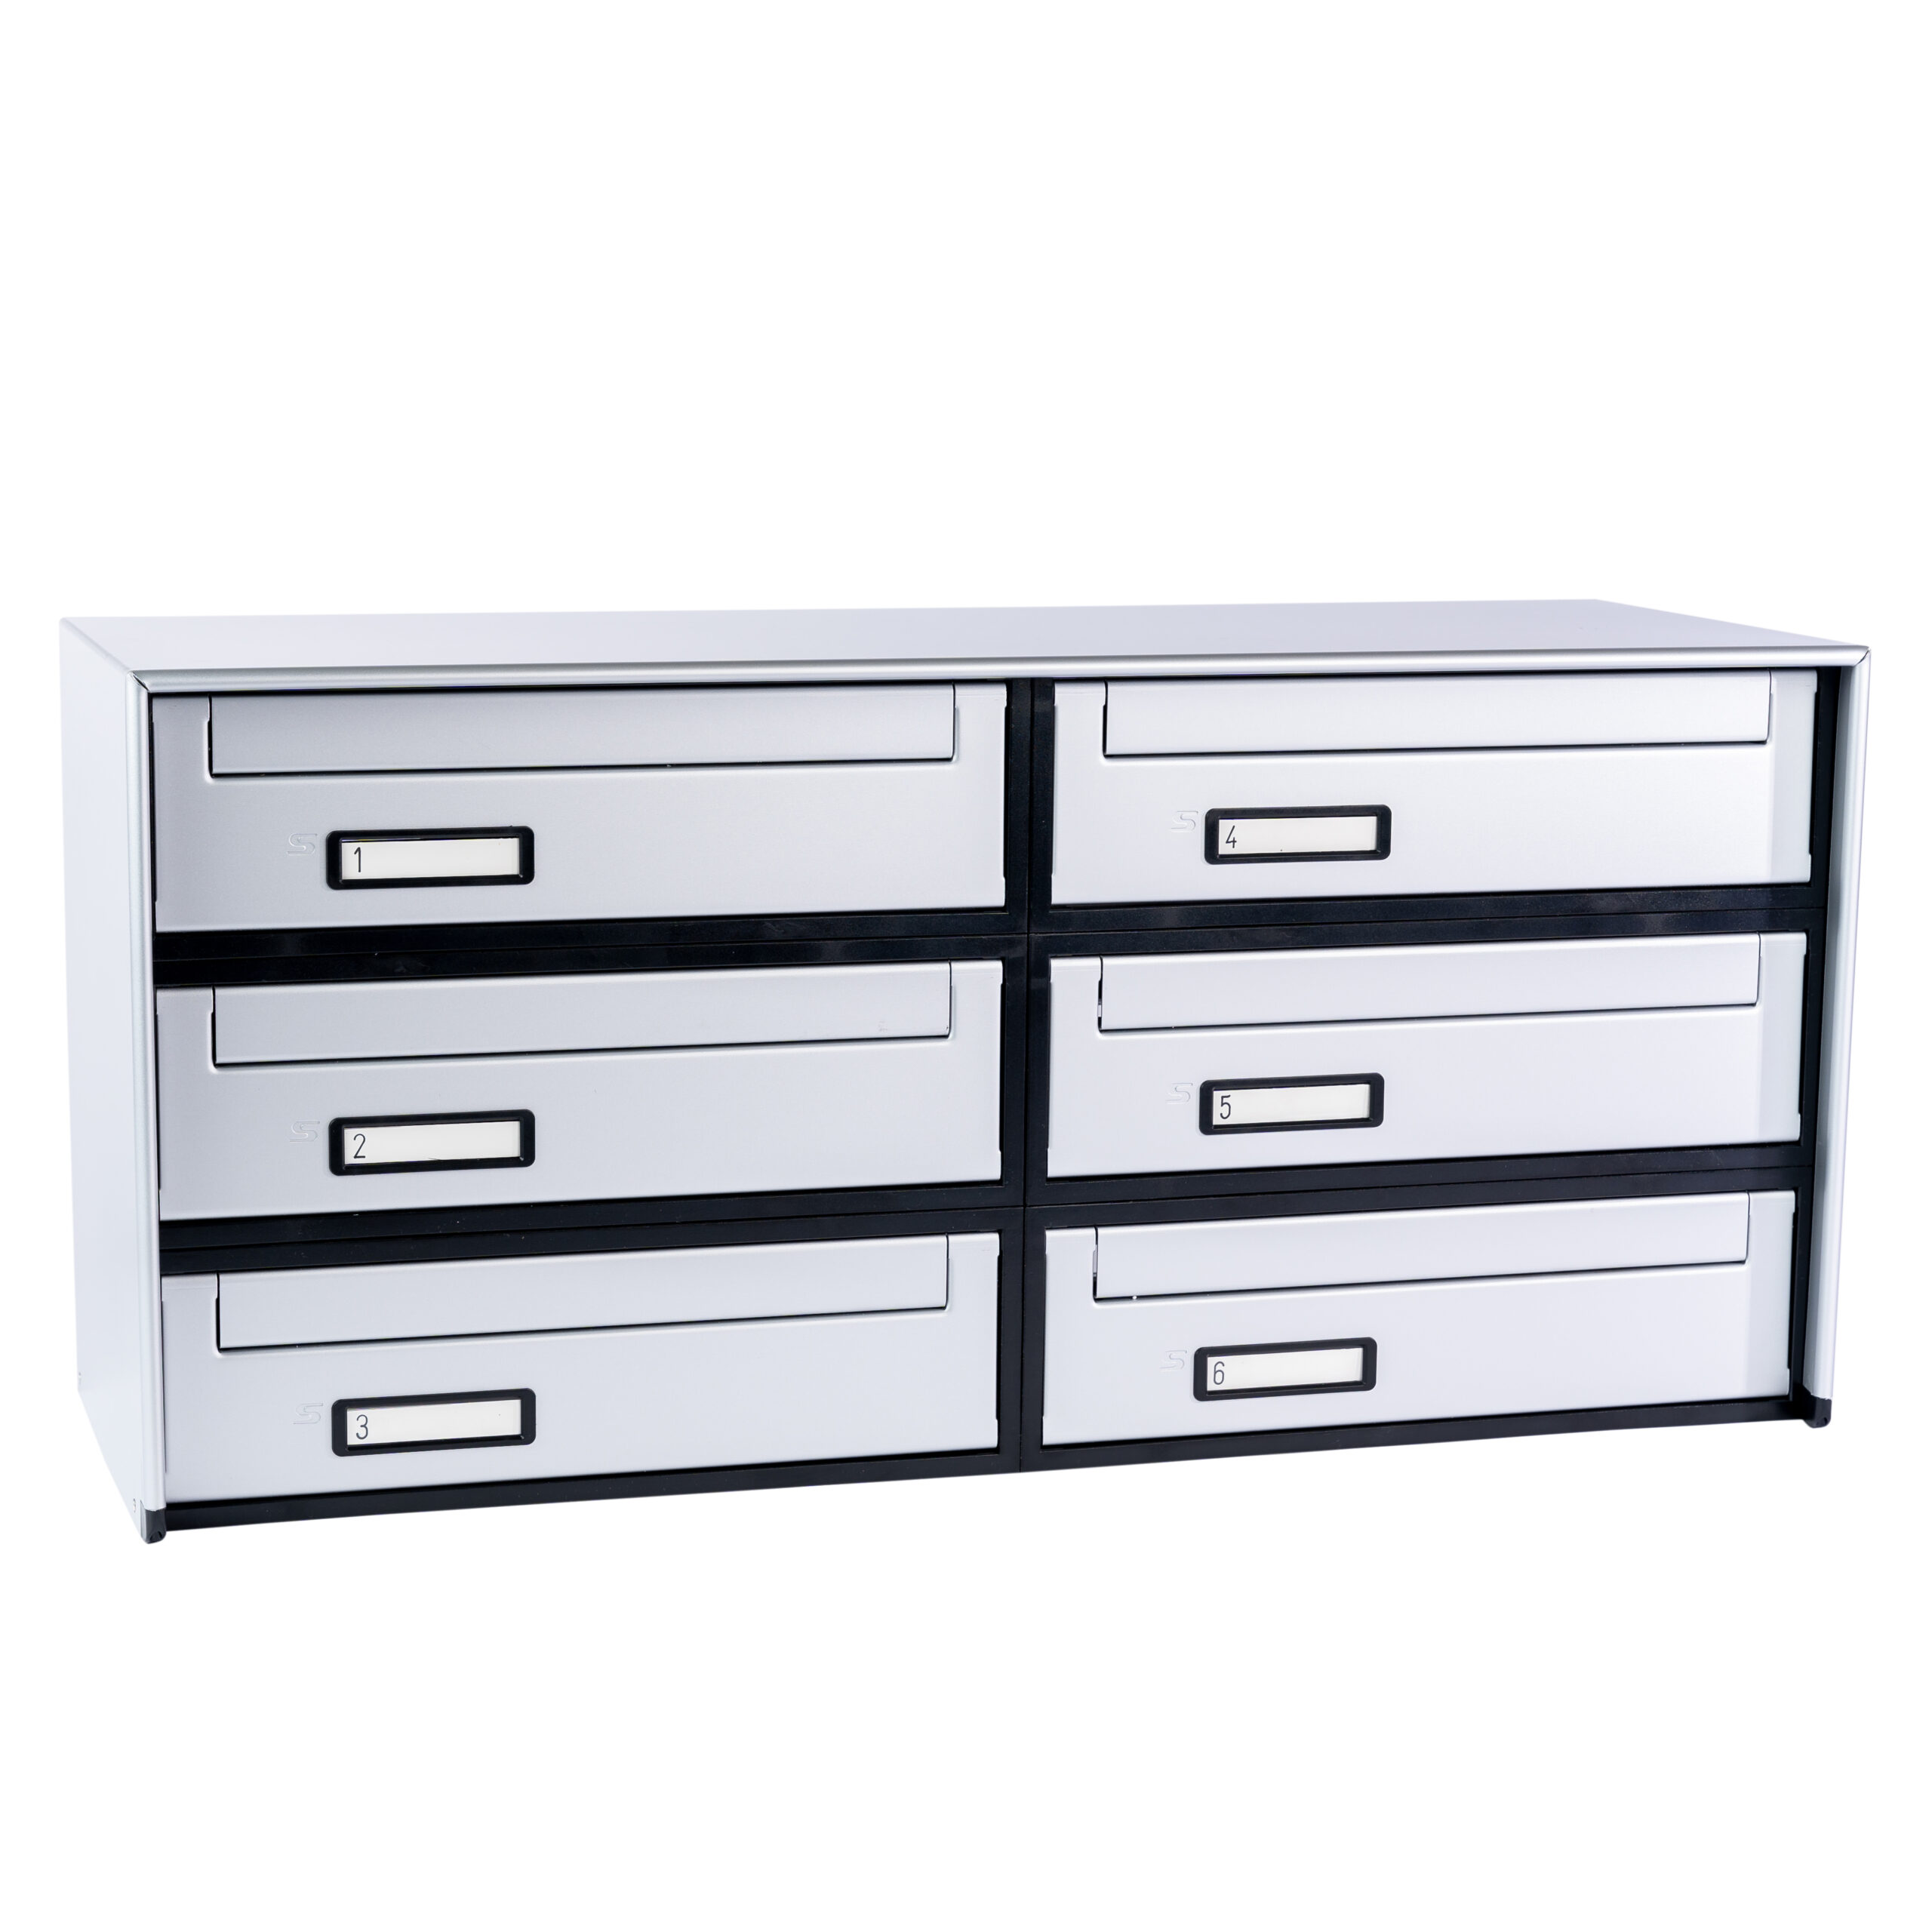 SC6 standard modular letterbox units with rear mail collection - 6 mailboxes